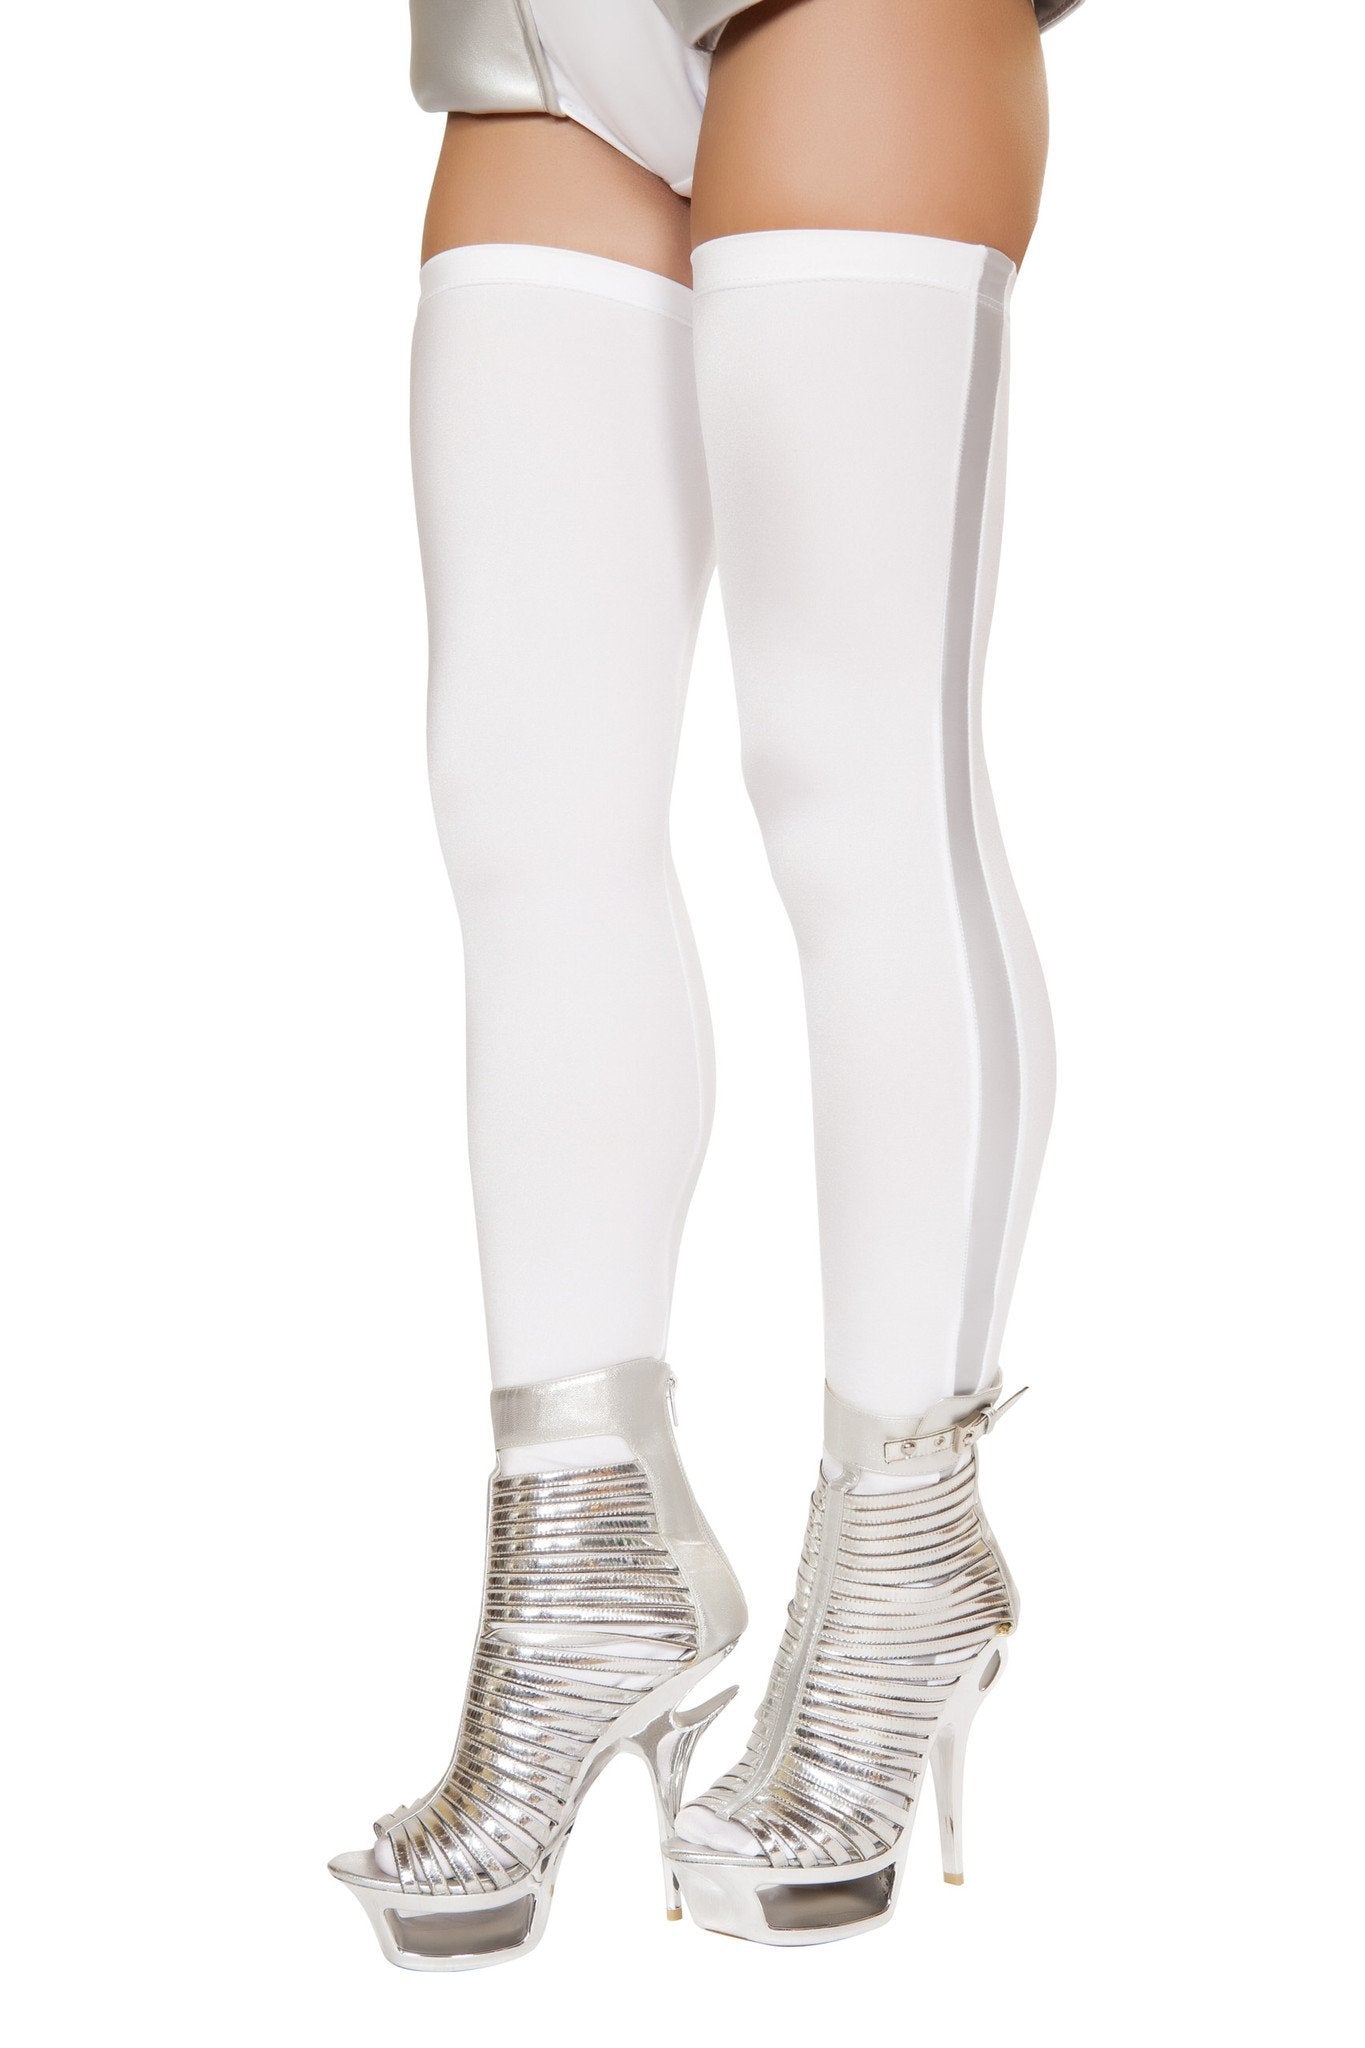 Buy Pair of White Leggings with Silver Metallic Top from RomaRetailShop for 9.99 with Same Day Shipping Designed by Roma Costume ST4736-AS-O/S